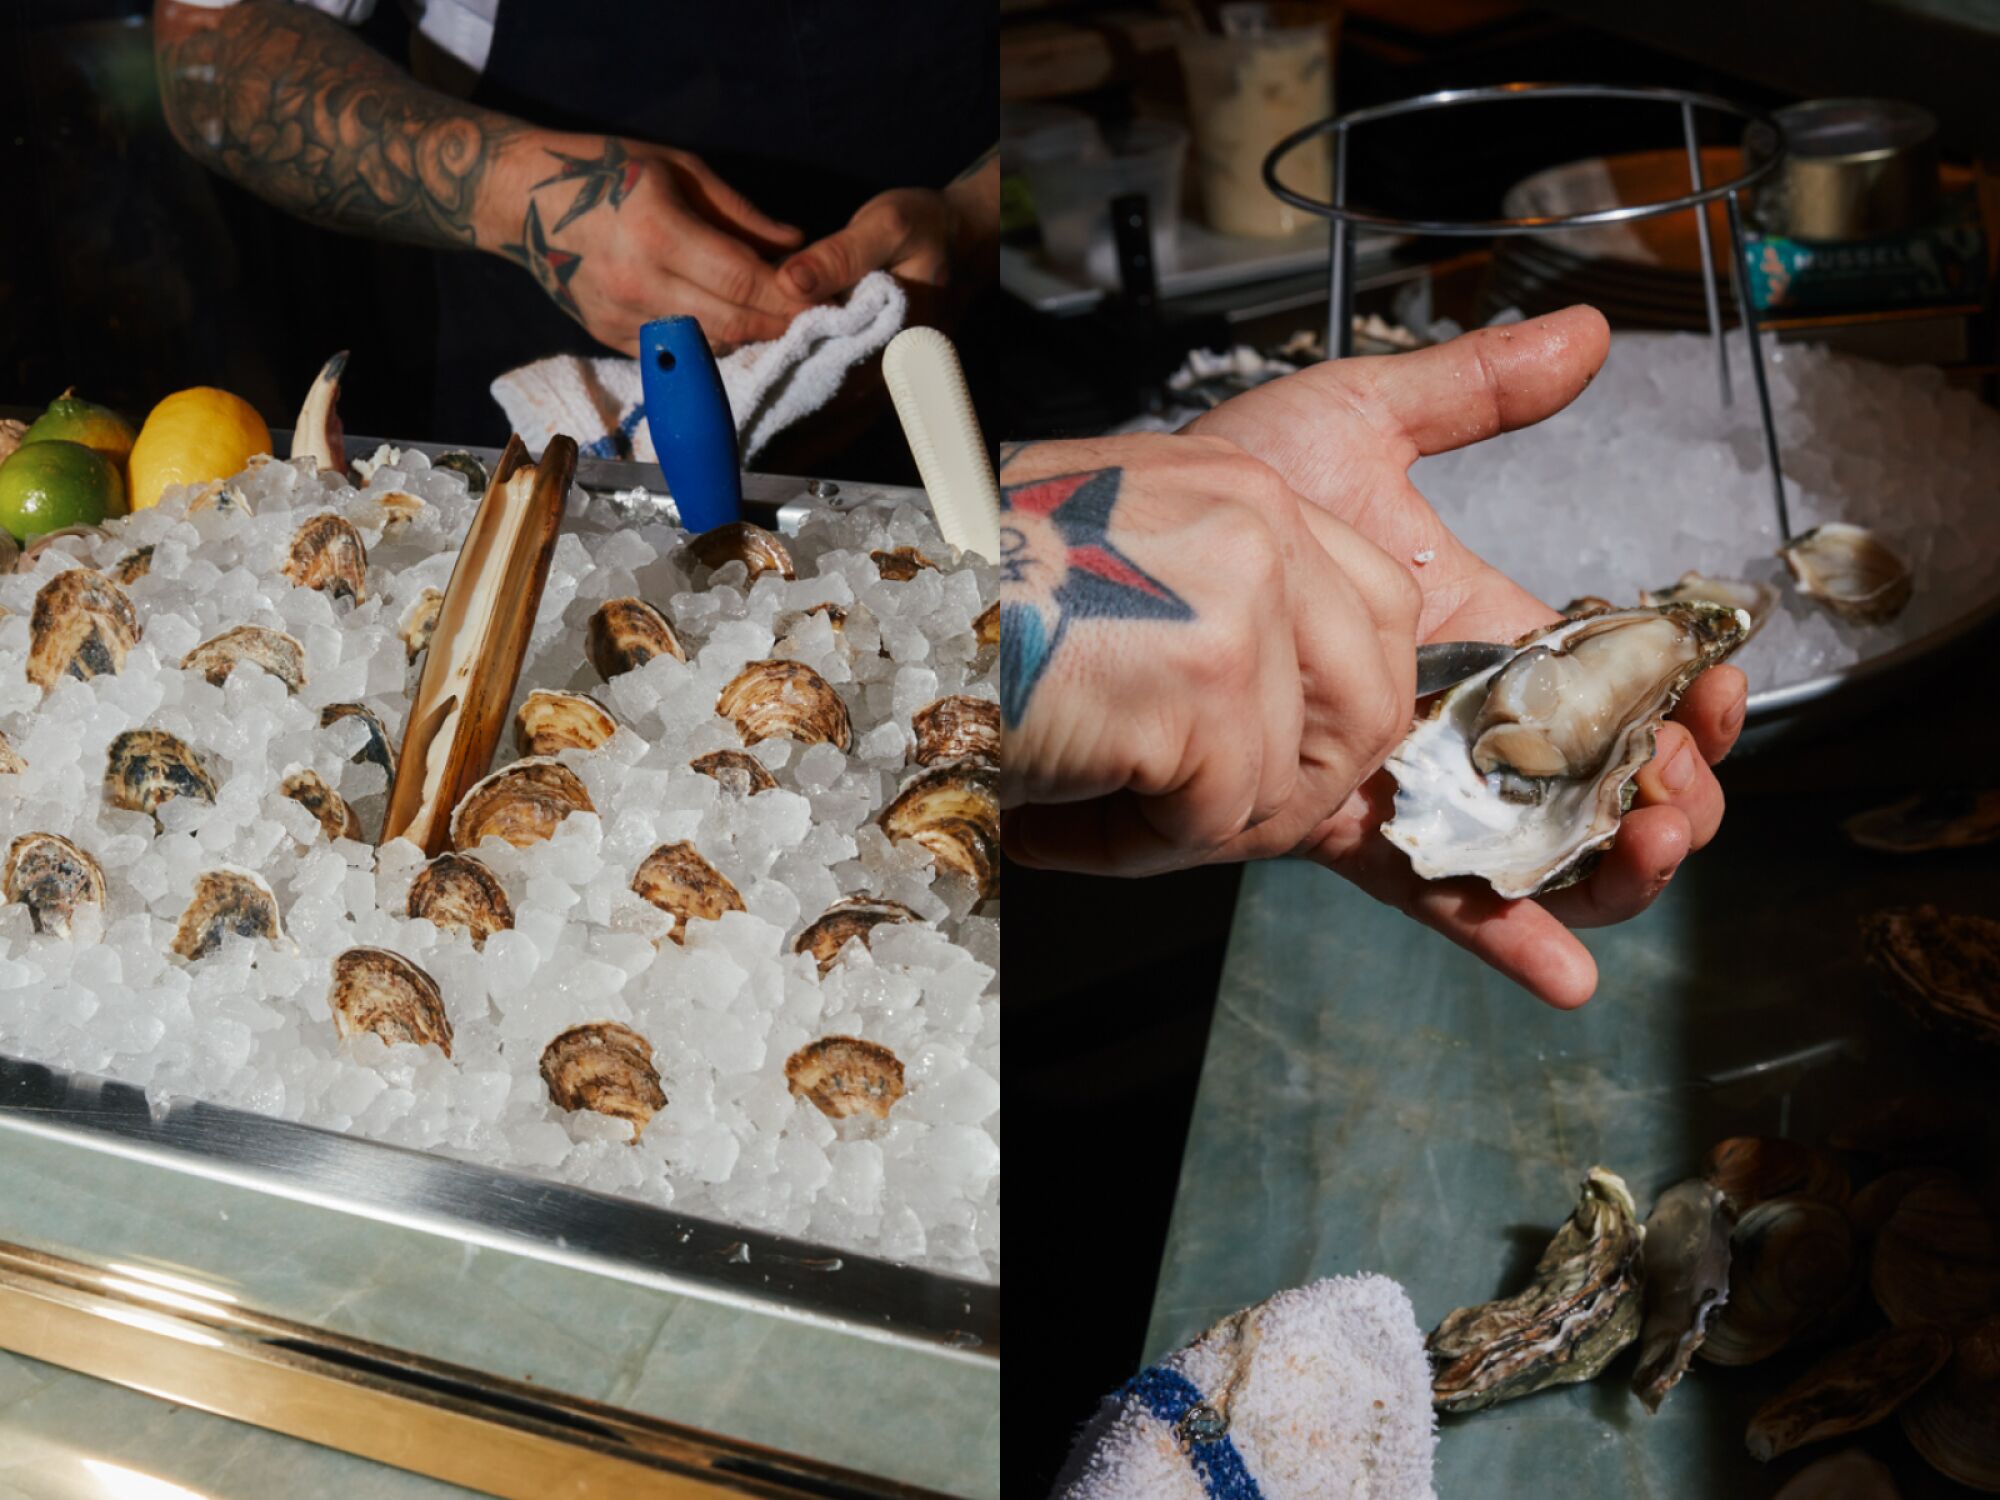 Chef shucks oysters at Saltie Girl in West Hollywood.